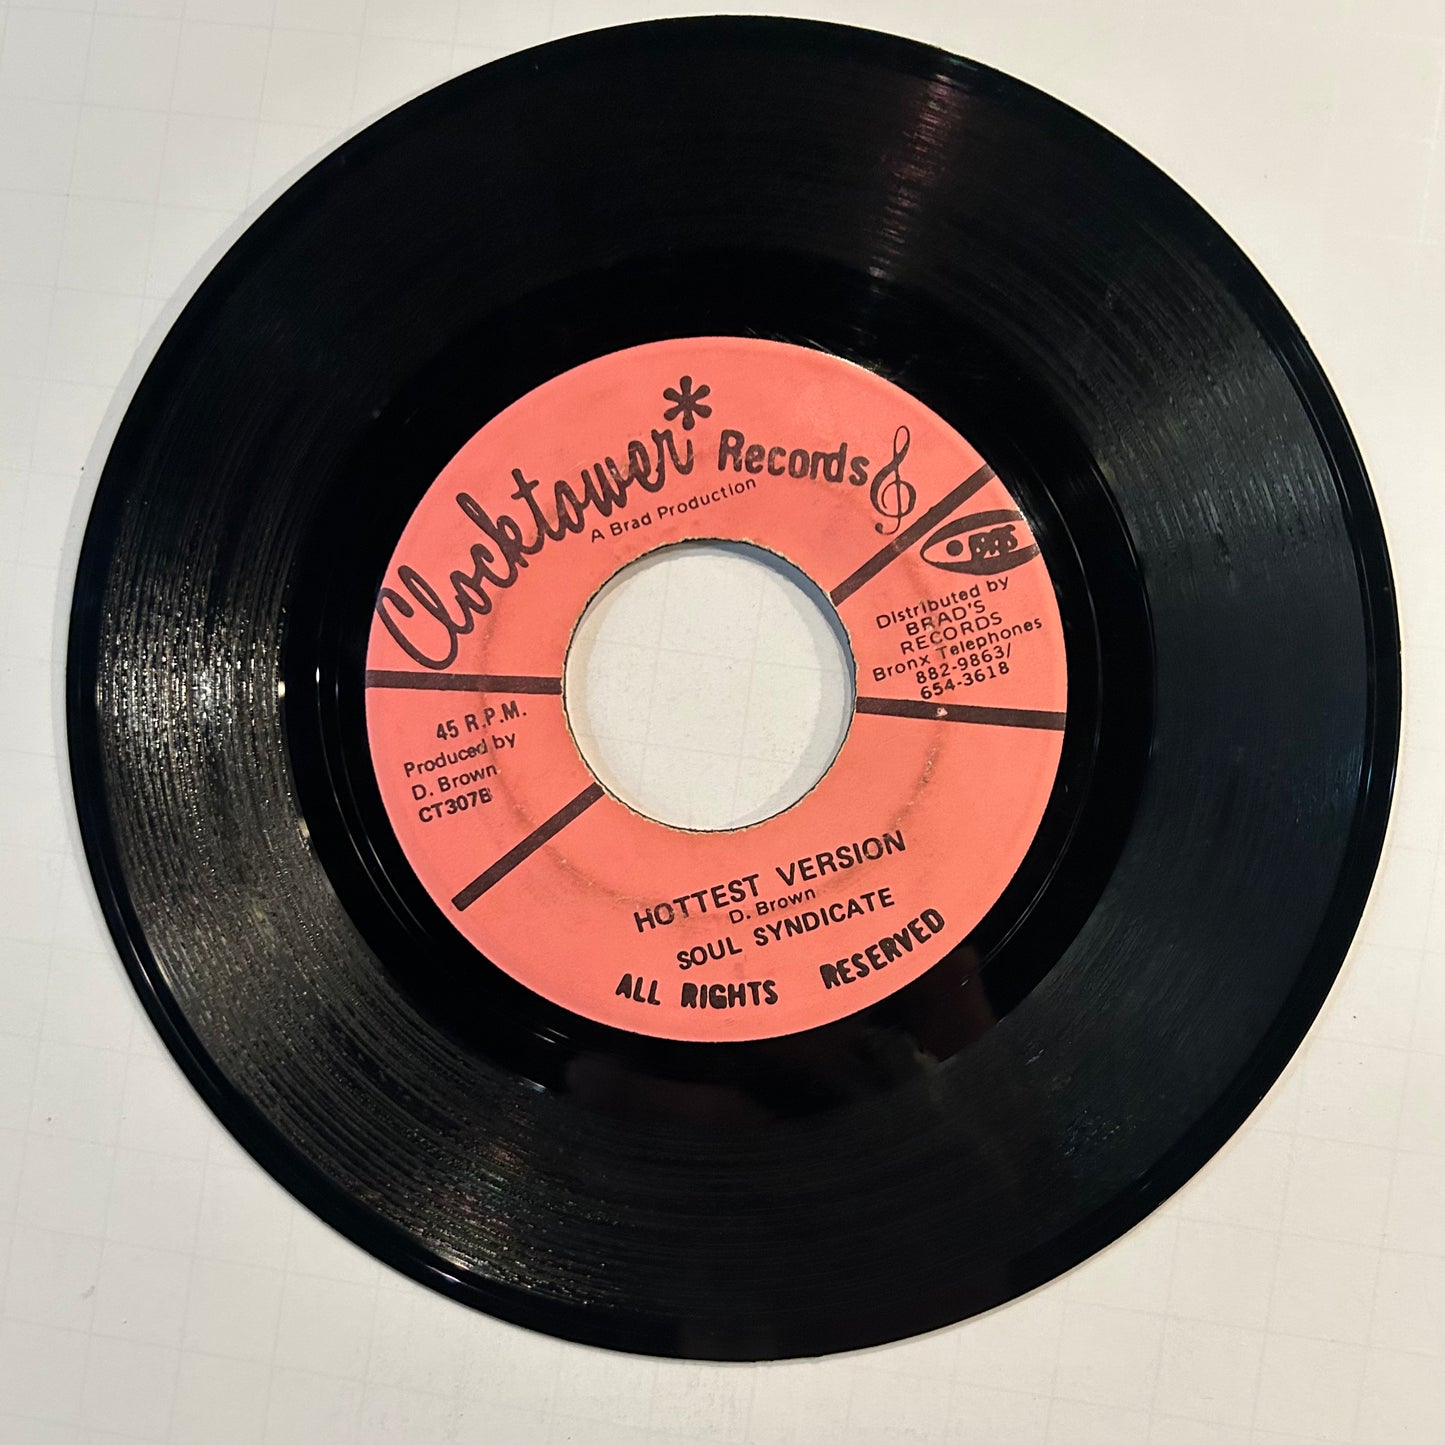 Dennis Brown “Some Like It Hot” 7”